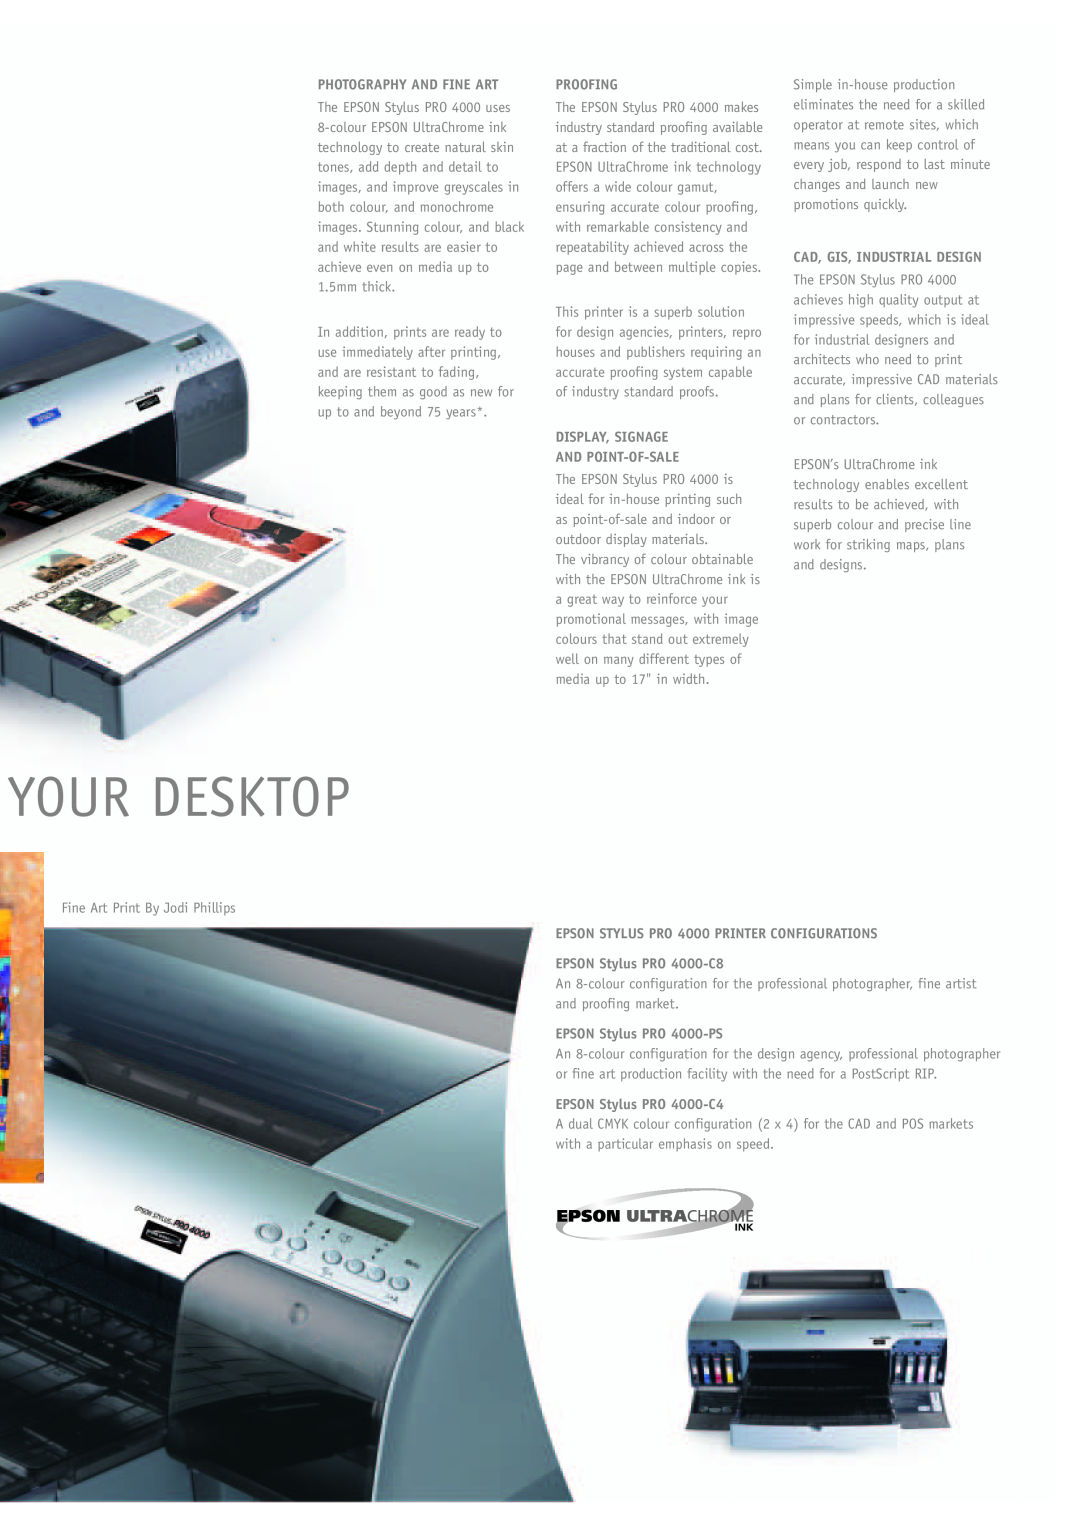 Epson Pro 4000 manual Your Desktop, Photography And Fine Art, Proofing, Display, Signage And Point-Of-Sale 